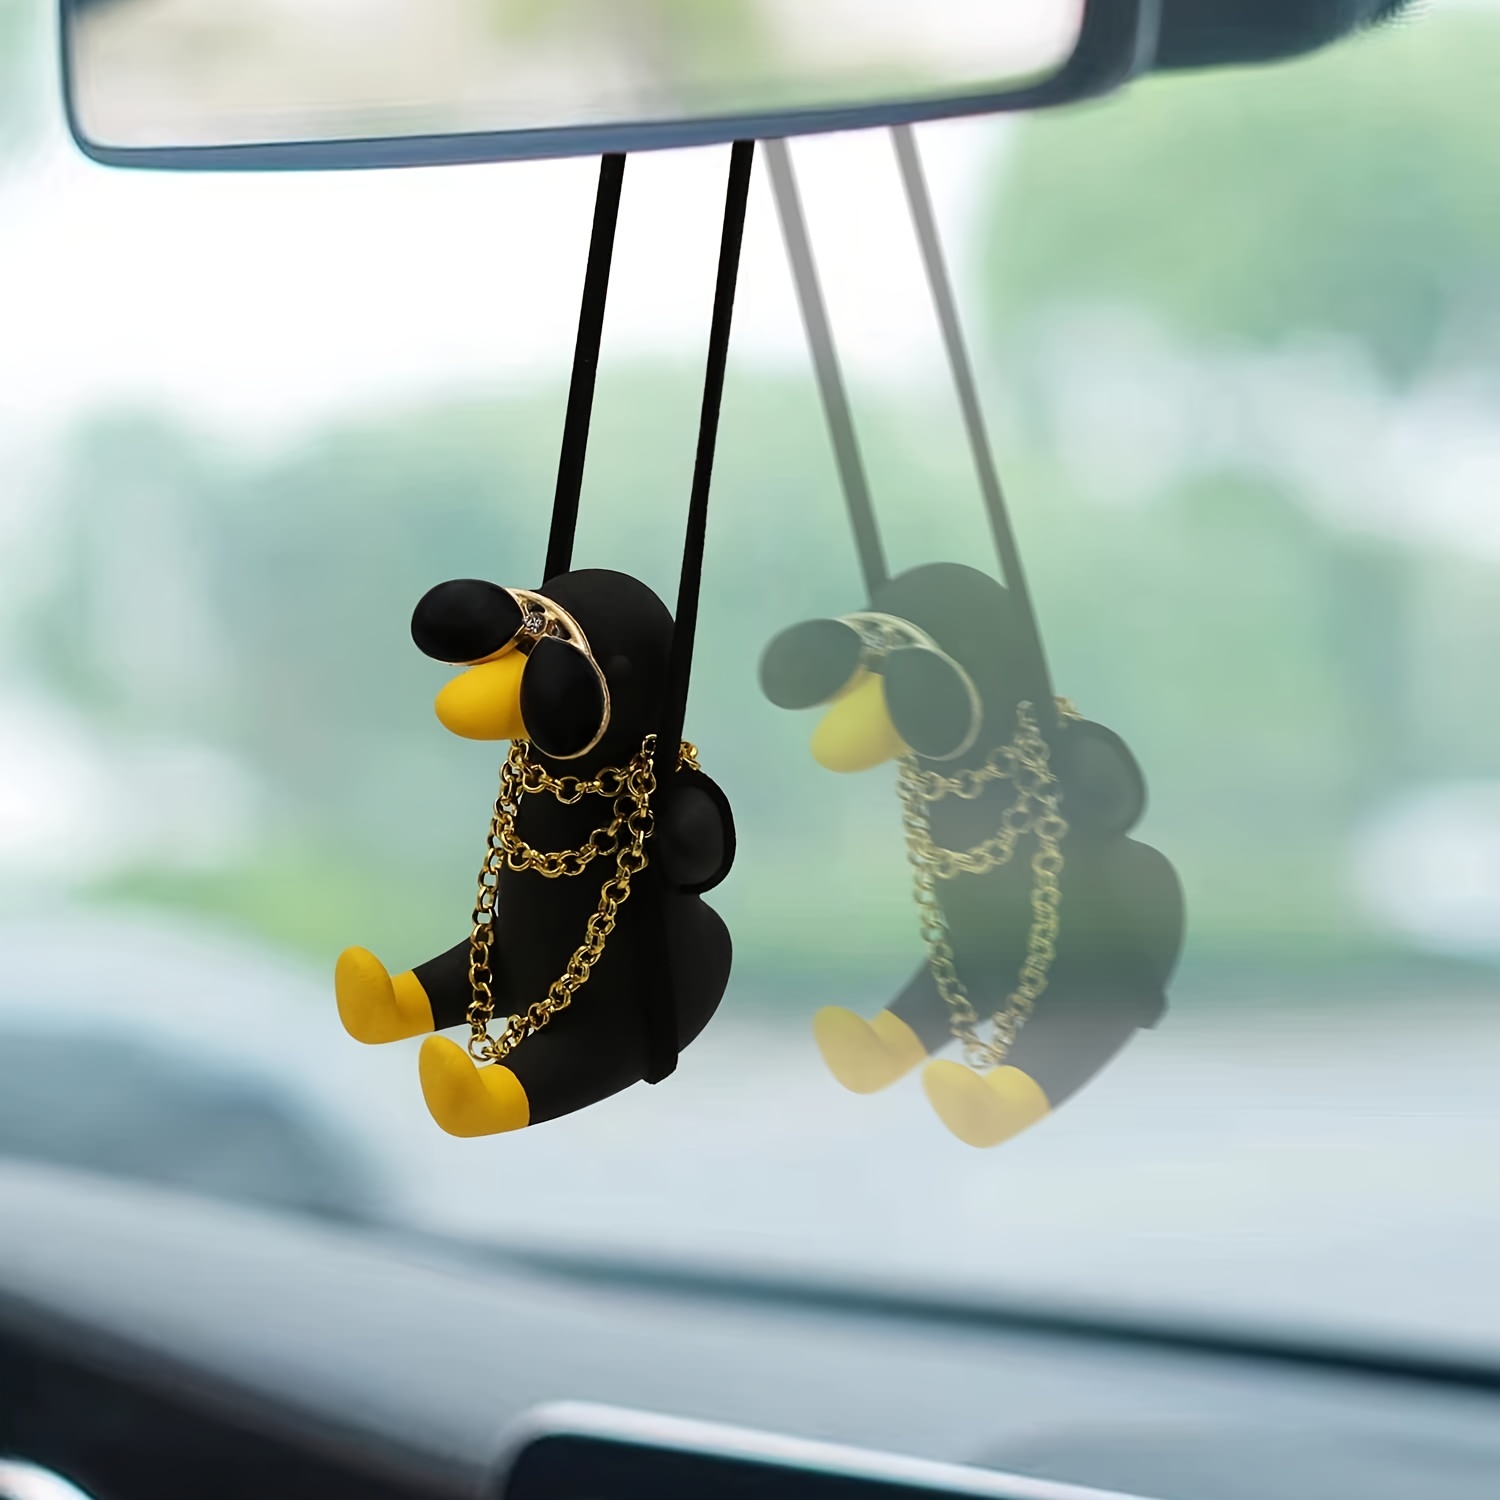 Swinging Duck Car Hanging Ornament, Cute Swing Duck Car Hanging Accessories  for Rear View Mirror, Car Interior Accessories 